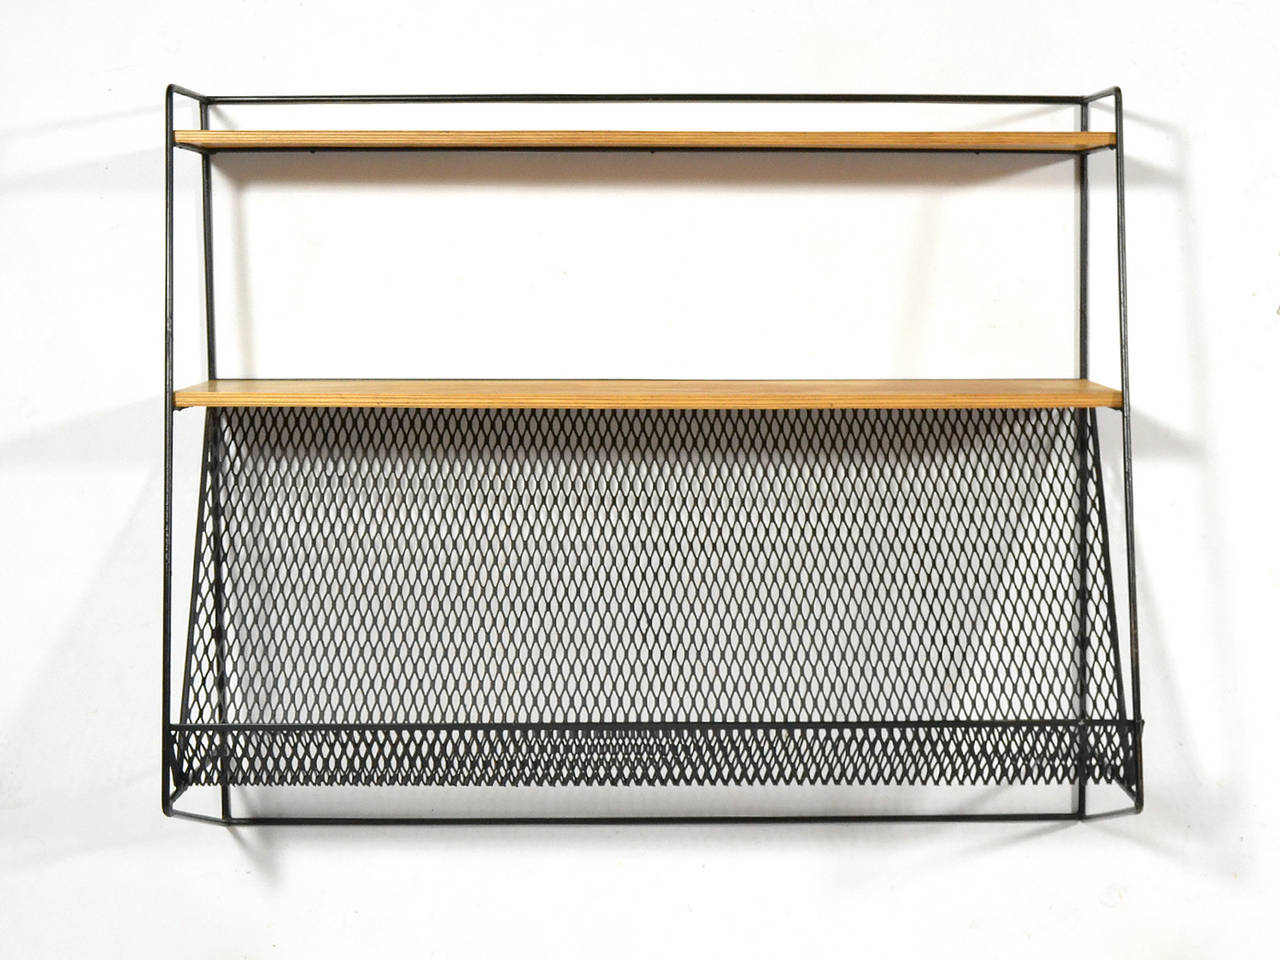 This wall-mounted shelf is quite similar to designs by Paul McCobb for Bryce. It has two solid shelves and a metal mesh magazine shelf for a light, airy and graphic quality.